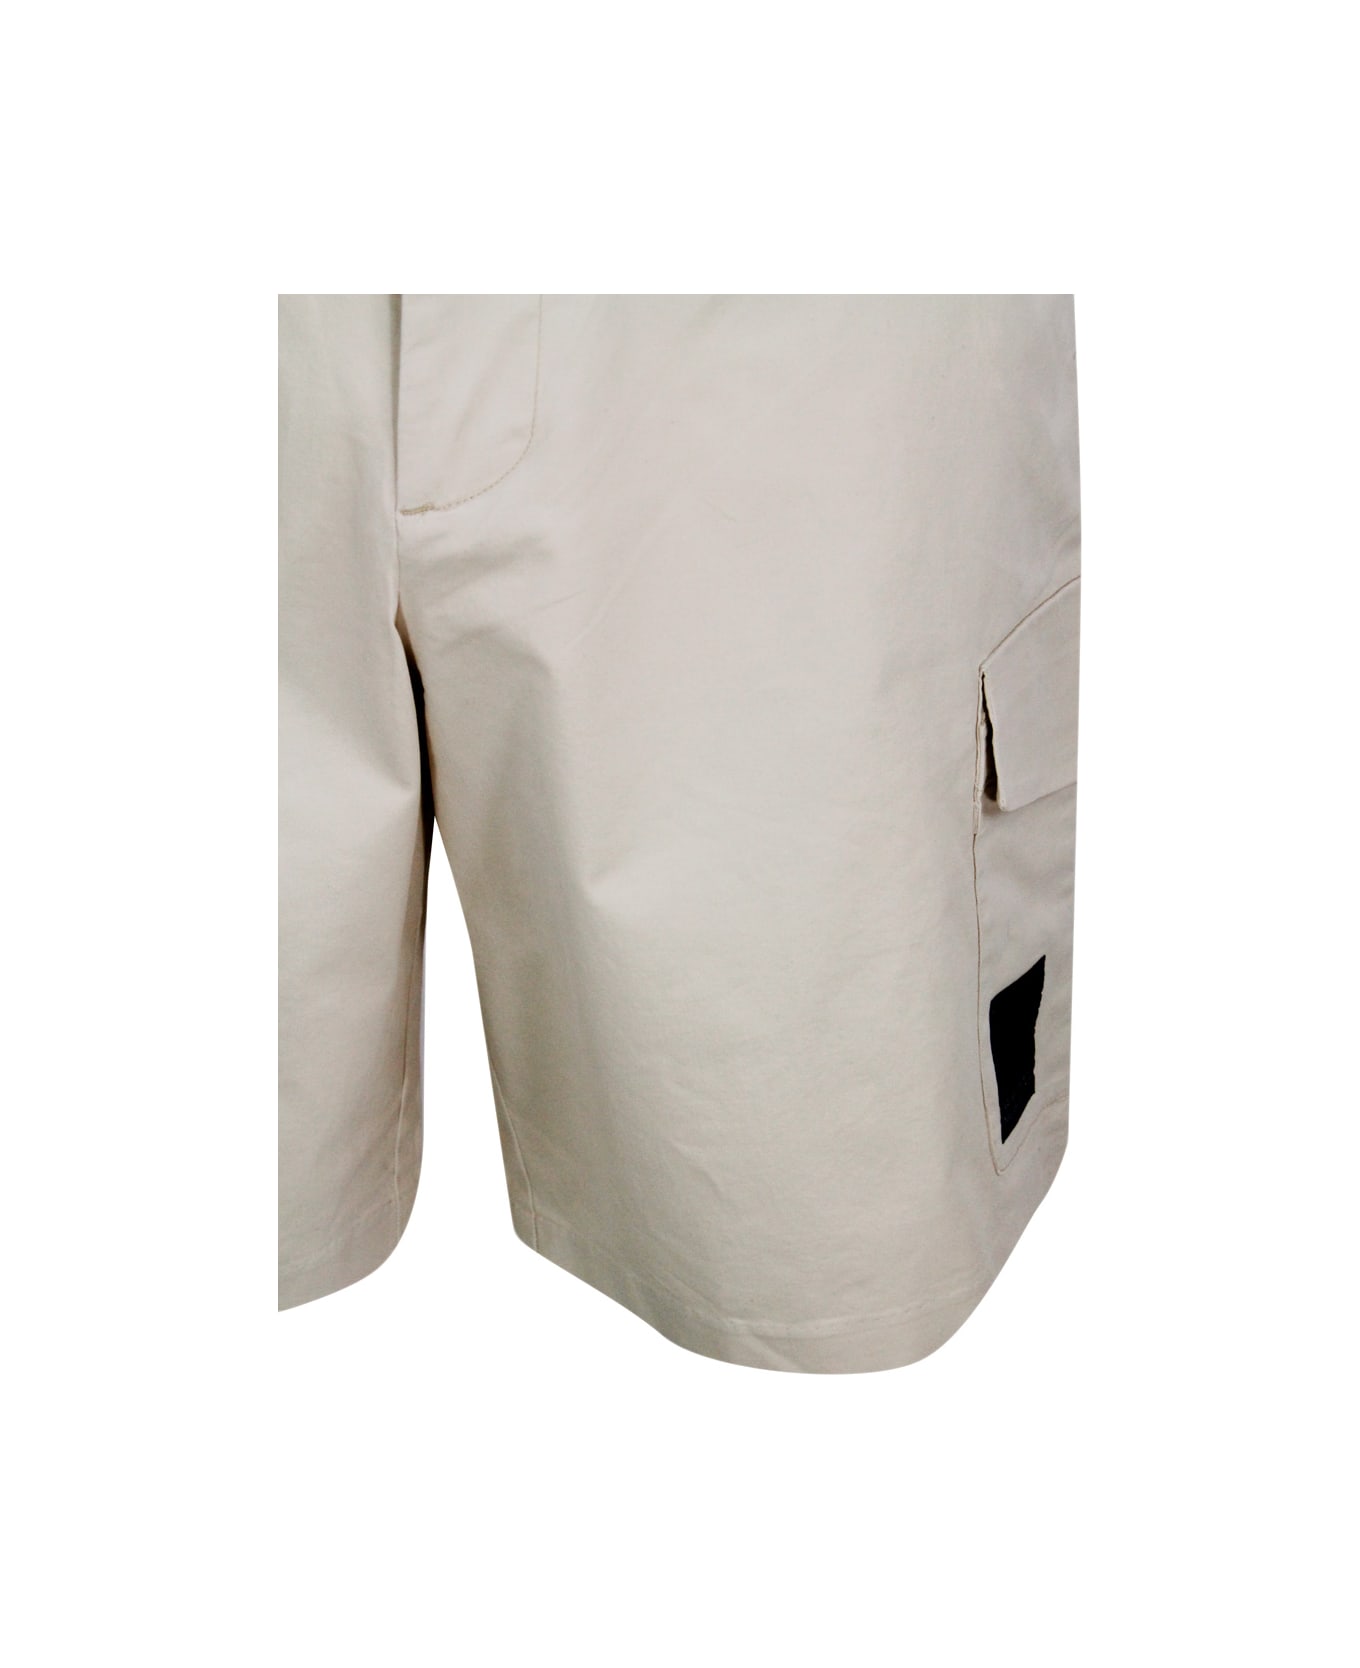 Armani Collezioni Stretch Cotton Bermuda Shorts, Cargo Model With Large Pockets On The Leg And Zip And Button Closure - Beige